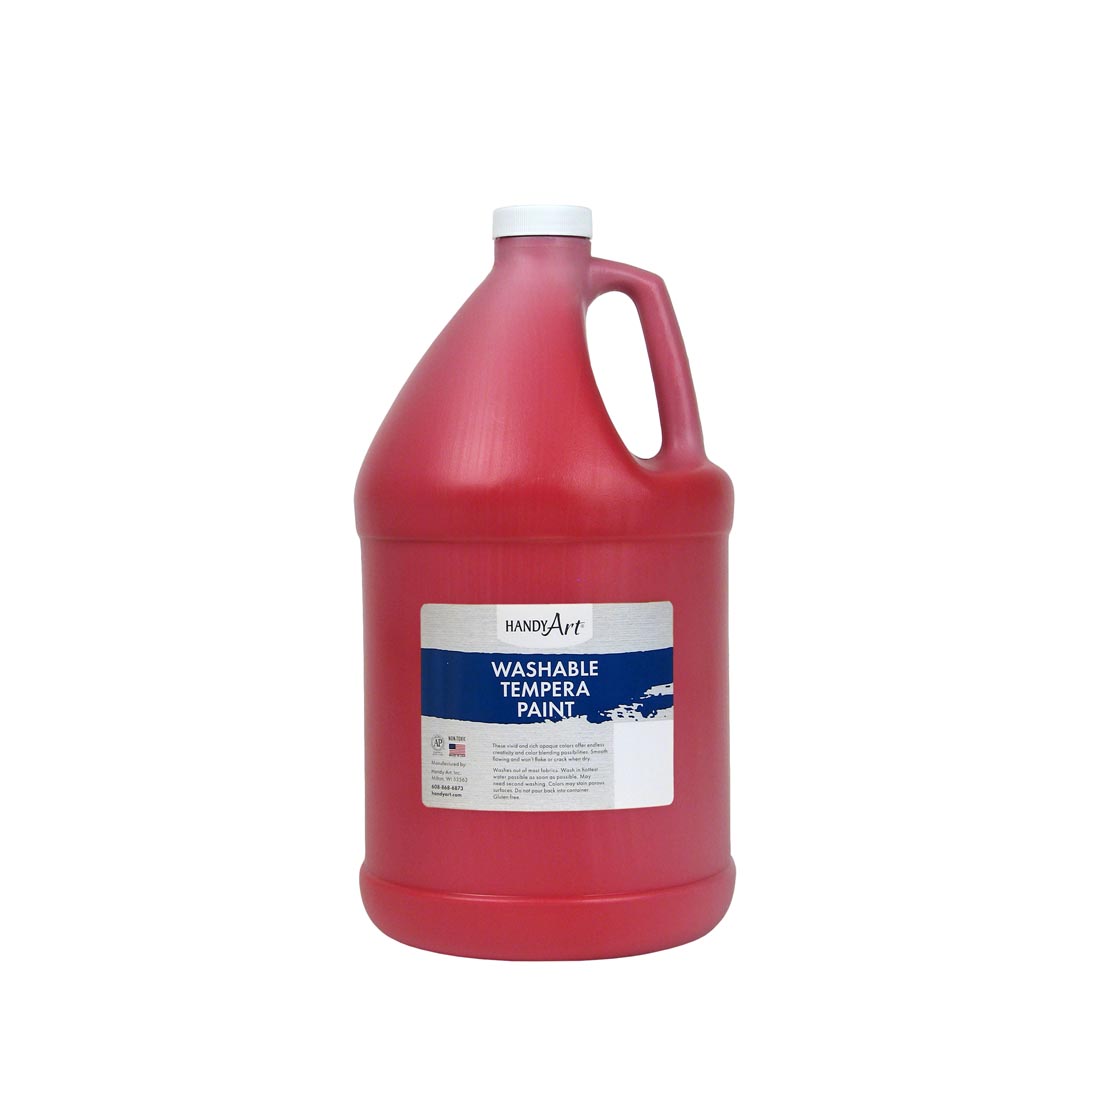 Gallon of Red Handy Art Washable Tempera Paint